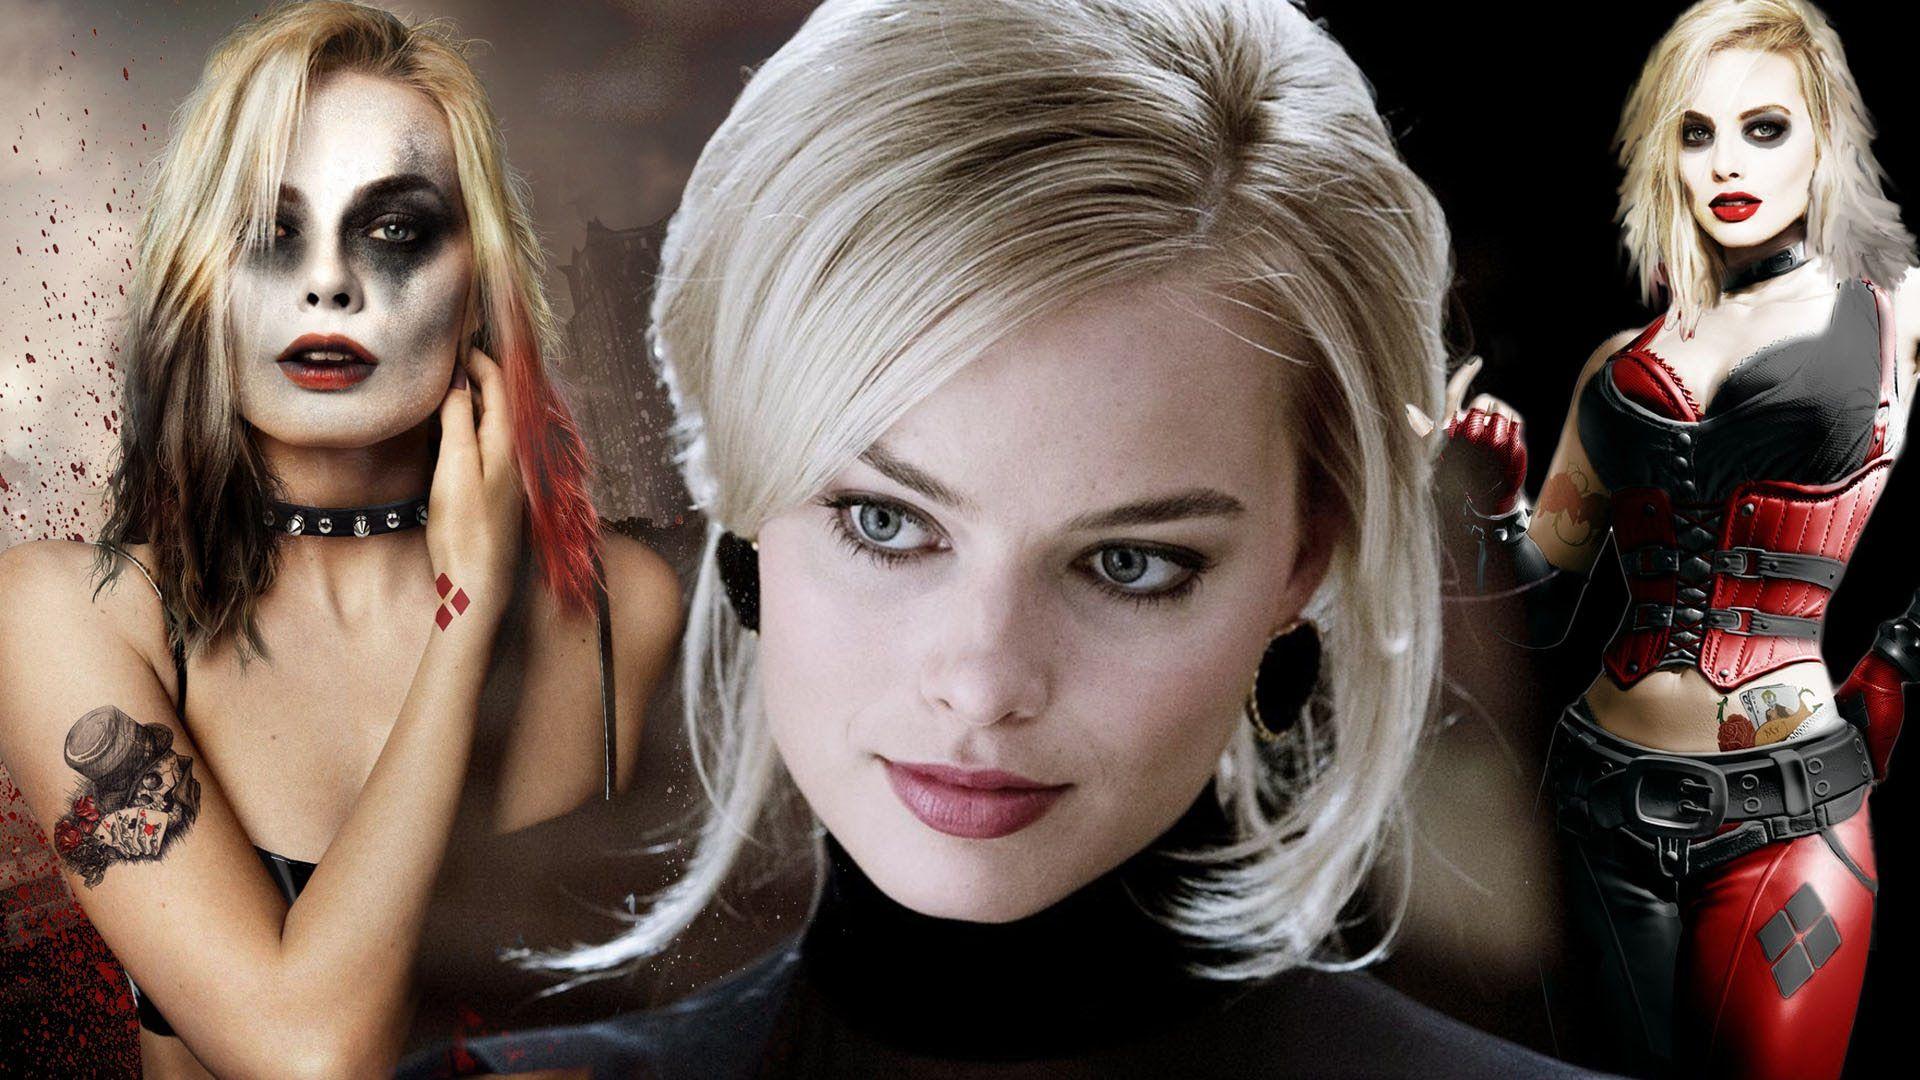 Margot Robbie as Harley Quinn is going to be AWESOME.